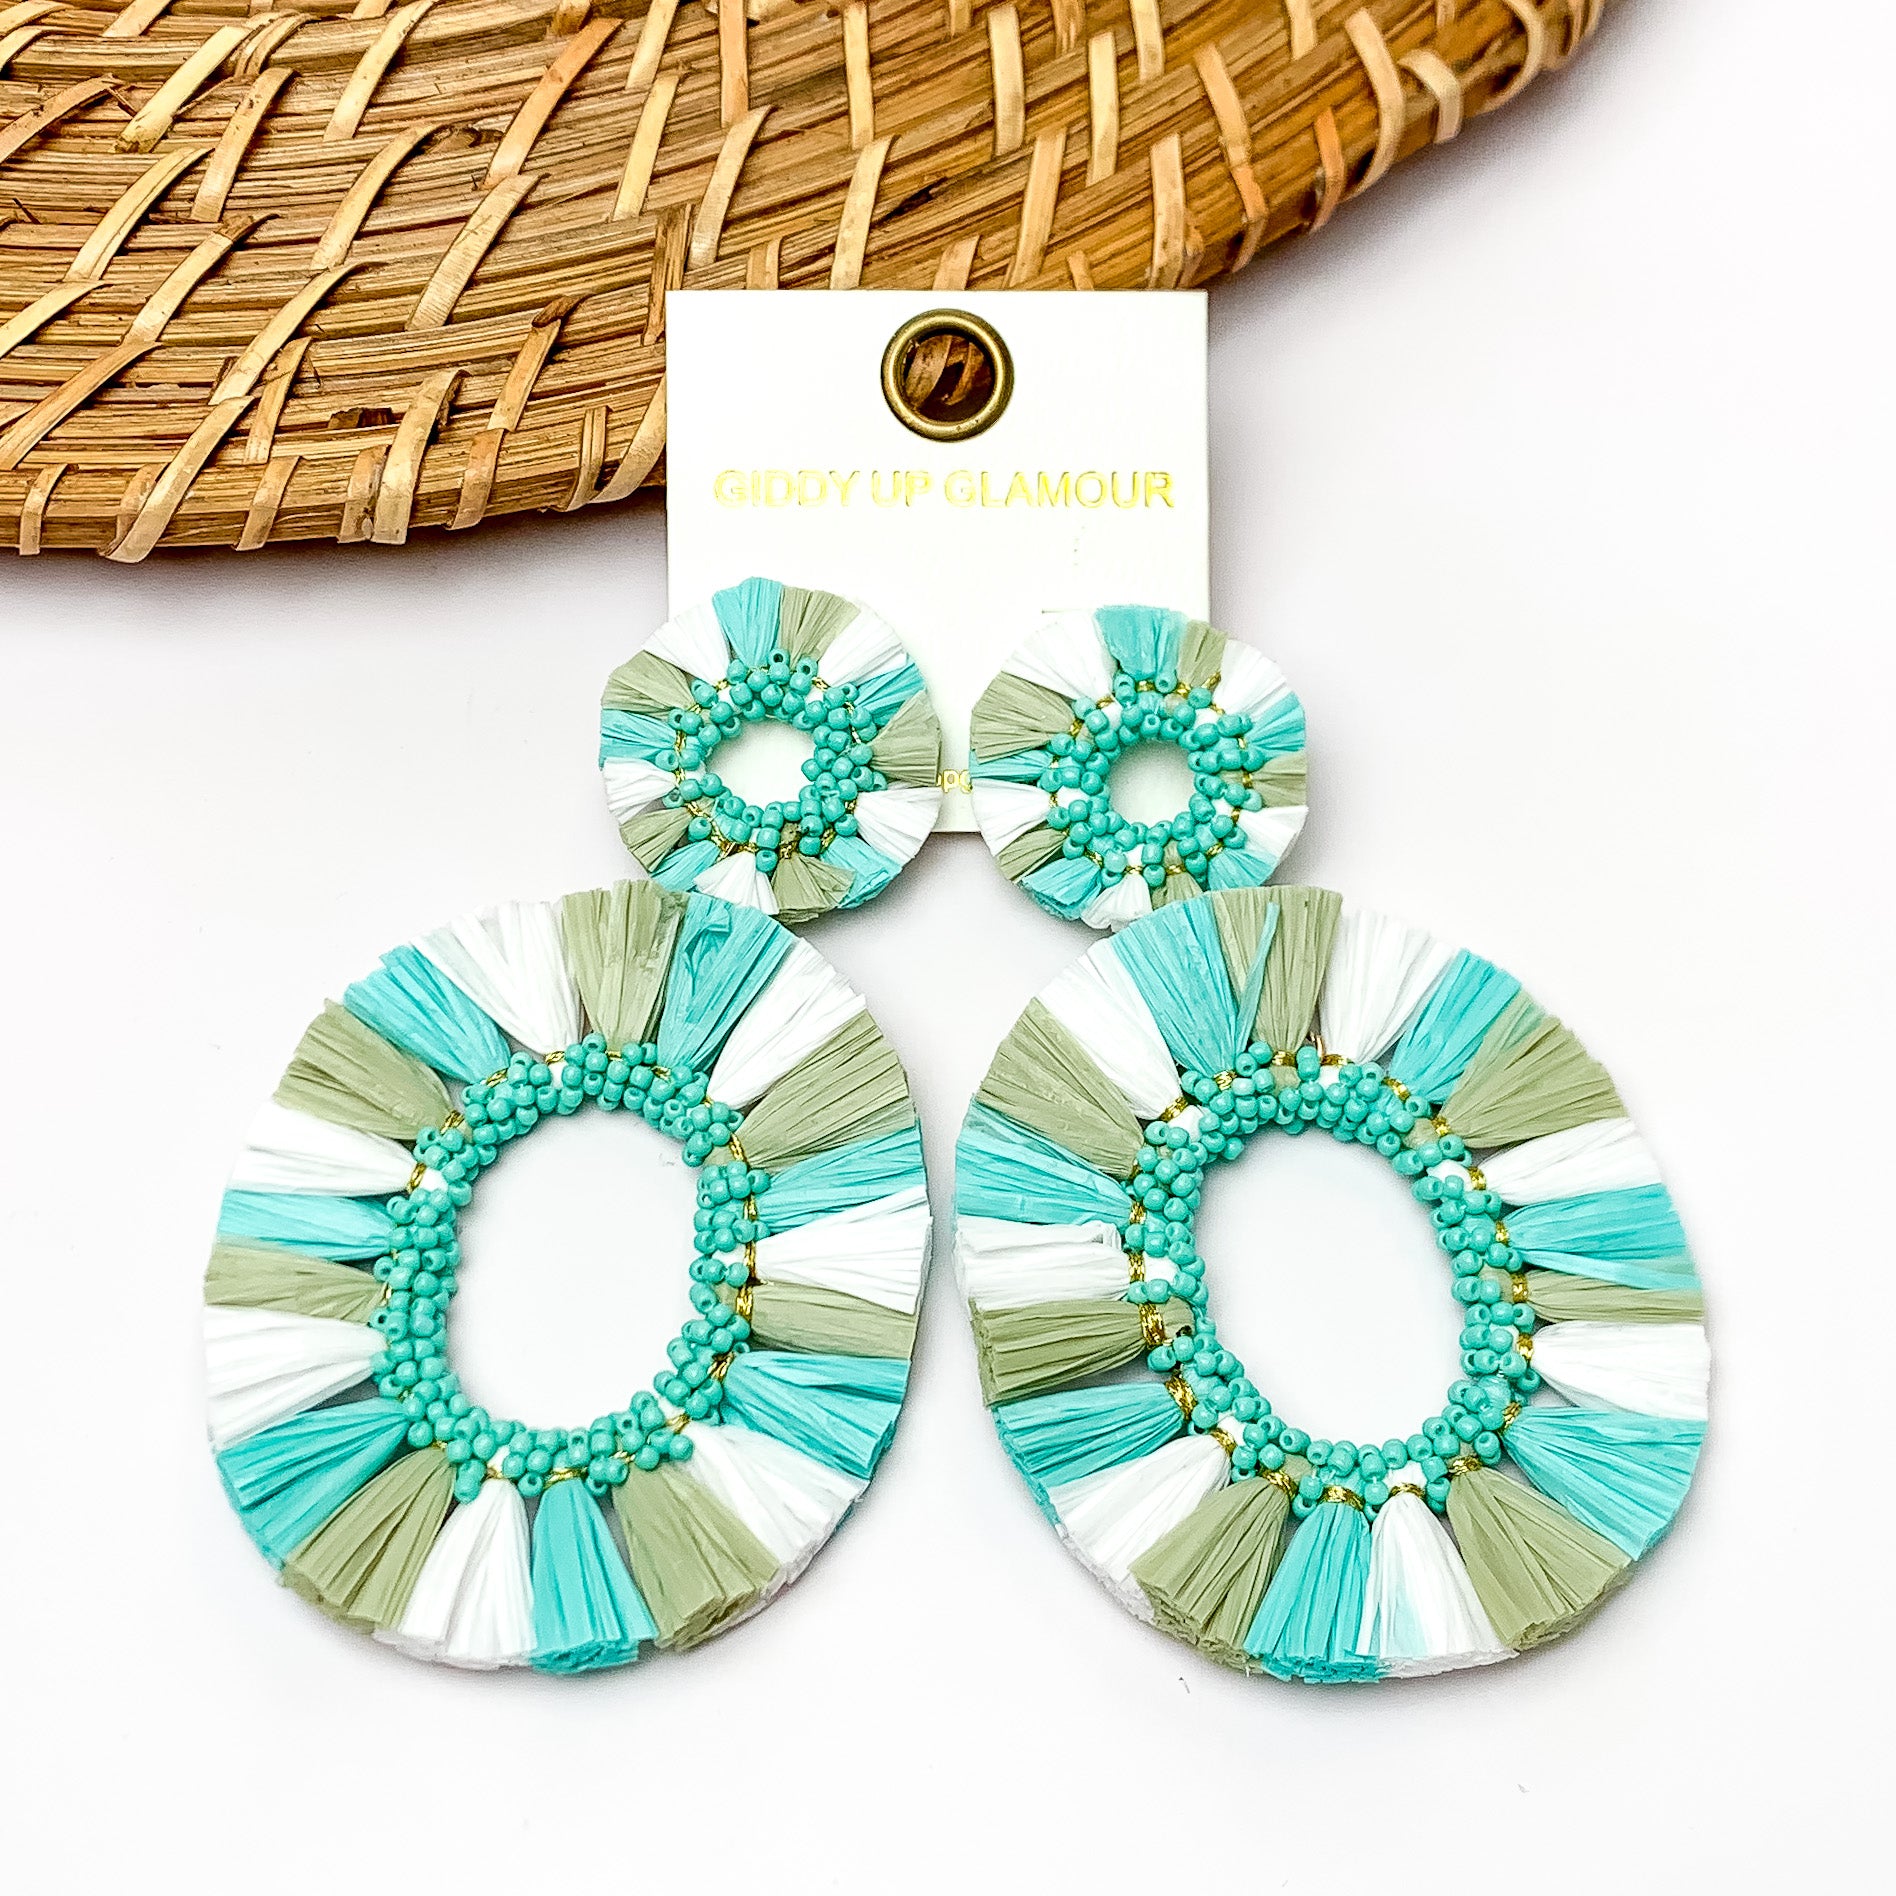 Siesta Keys Raffia Wrapped Open Oval Earrings in Turquoise, Green, and White. Pictured on a white background with wood like decoration in the top left corner.